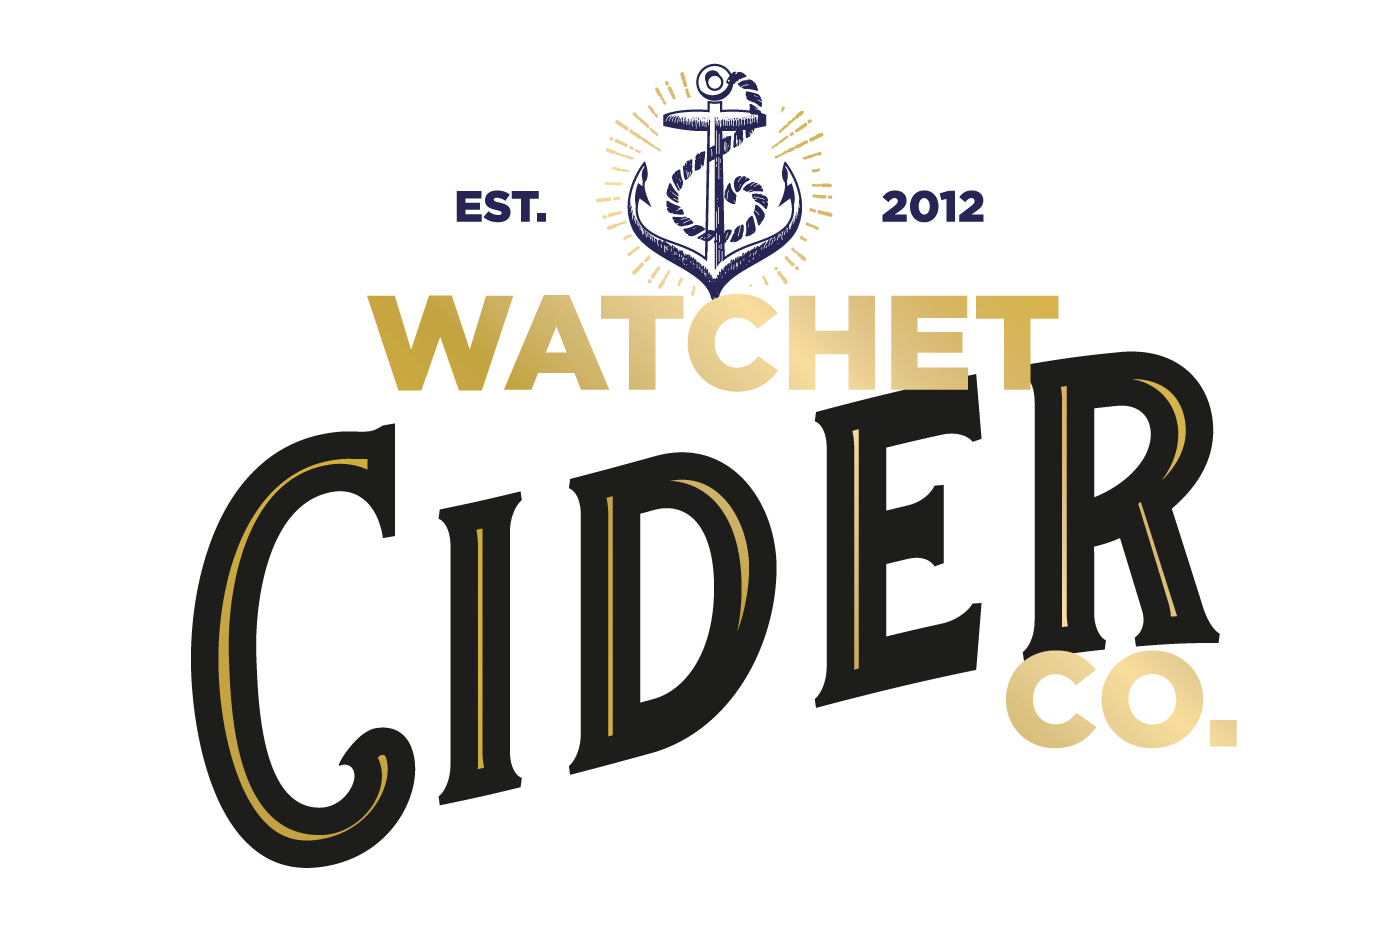 Watchet Cider Company After